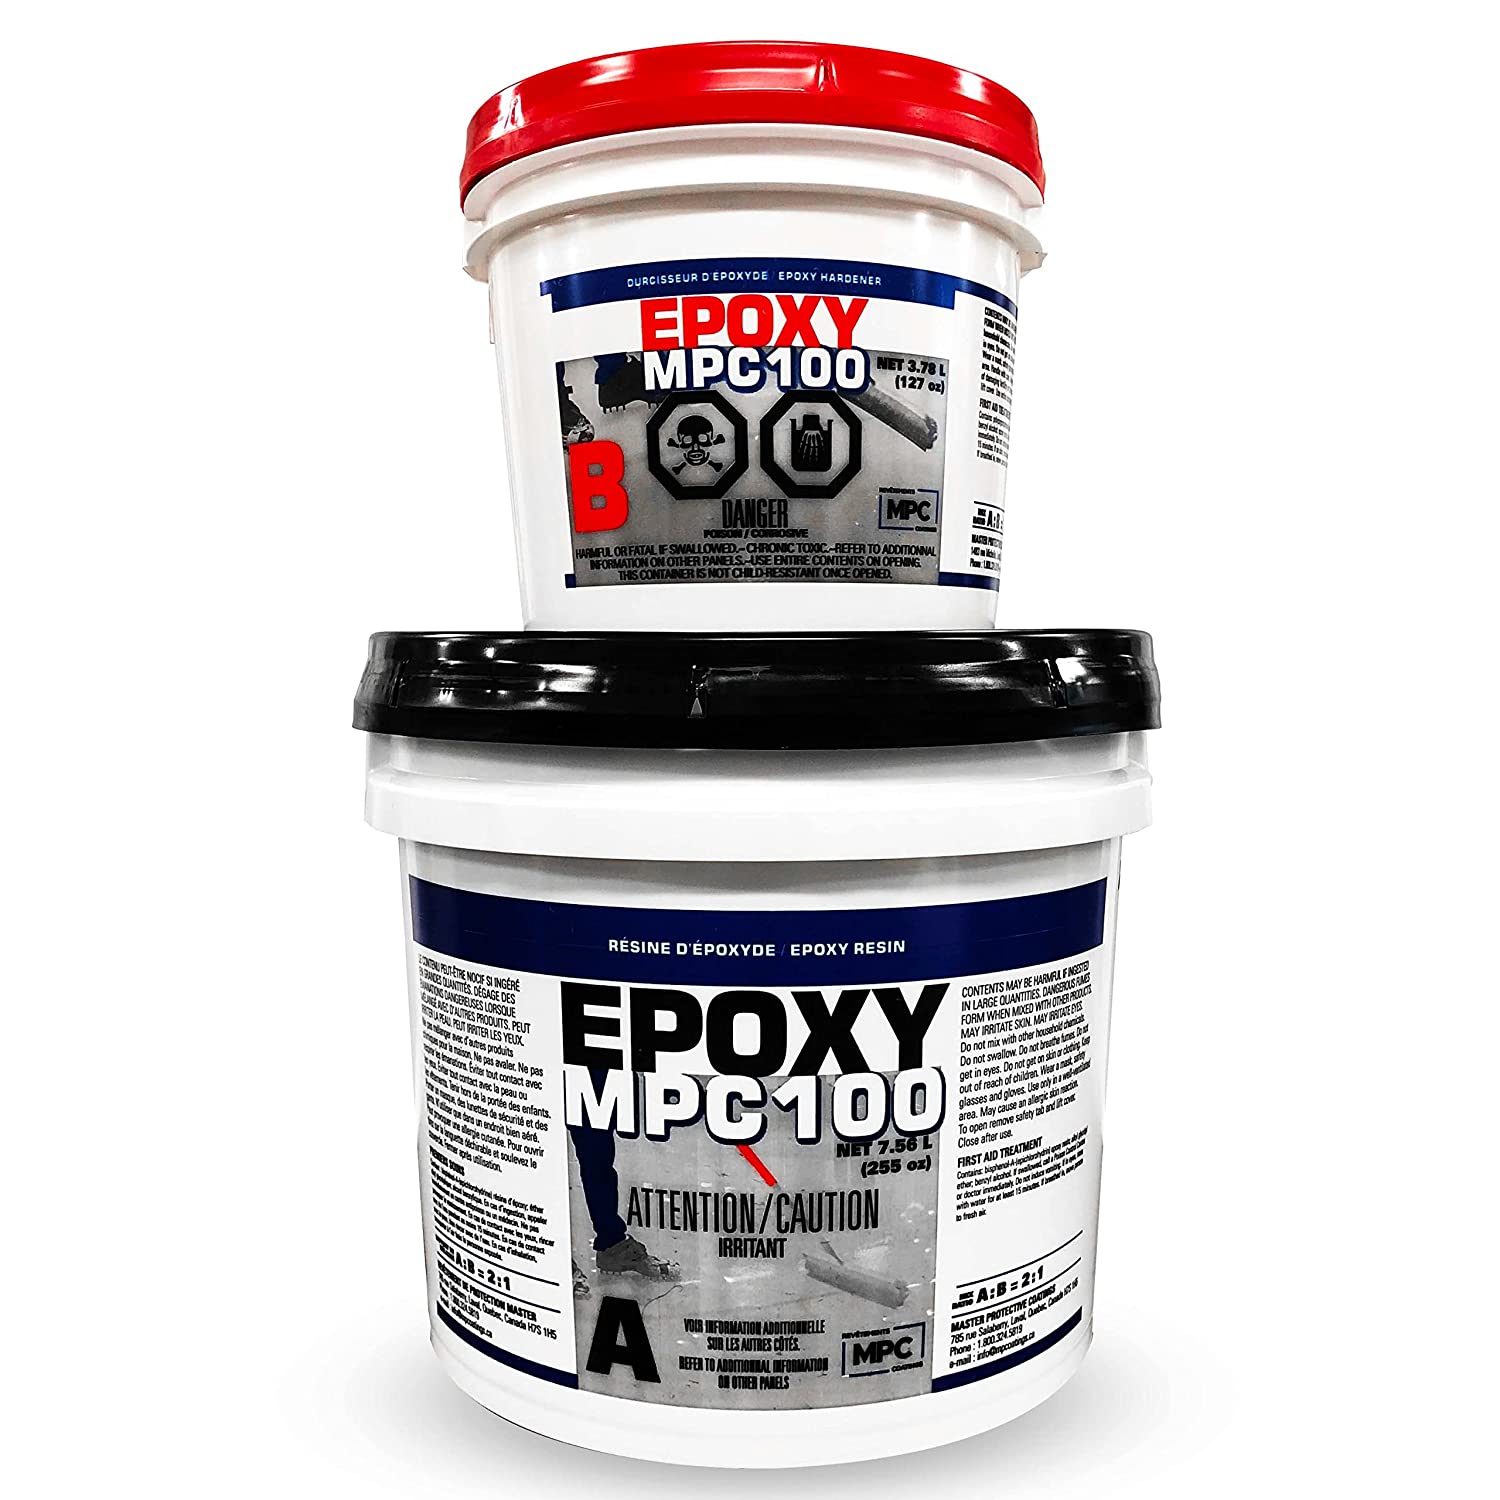 Clear Epoxy Resin Coating for Floors & Counter Tops, 100% Solids, Self Leveling - 3 Gallon Kit